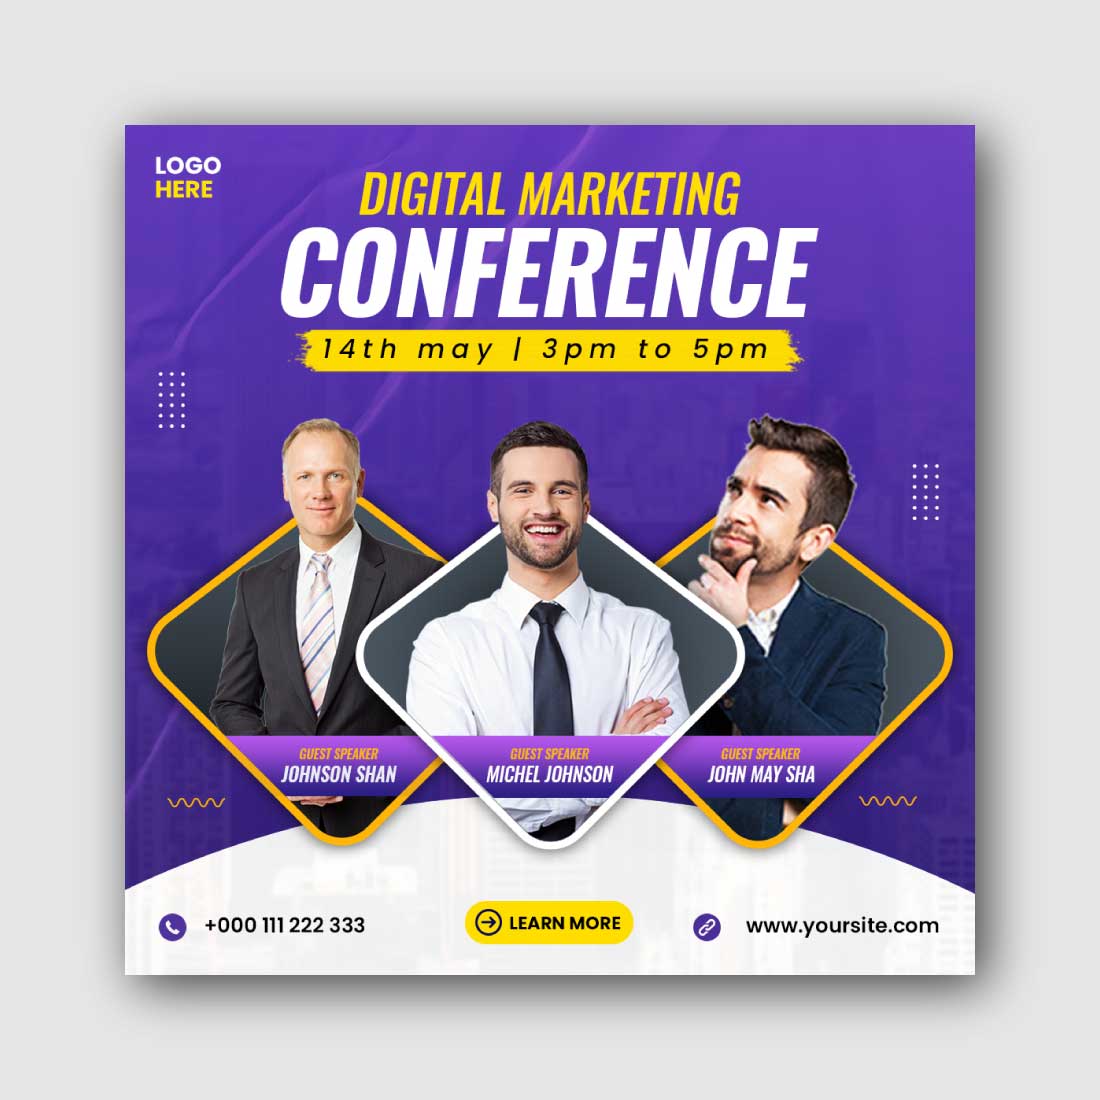 Conference Social Media Instagram Post Template cover image.